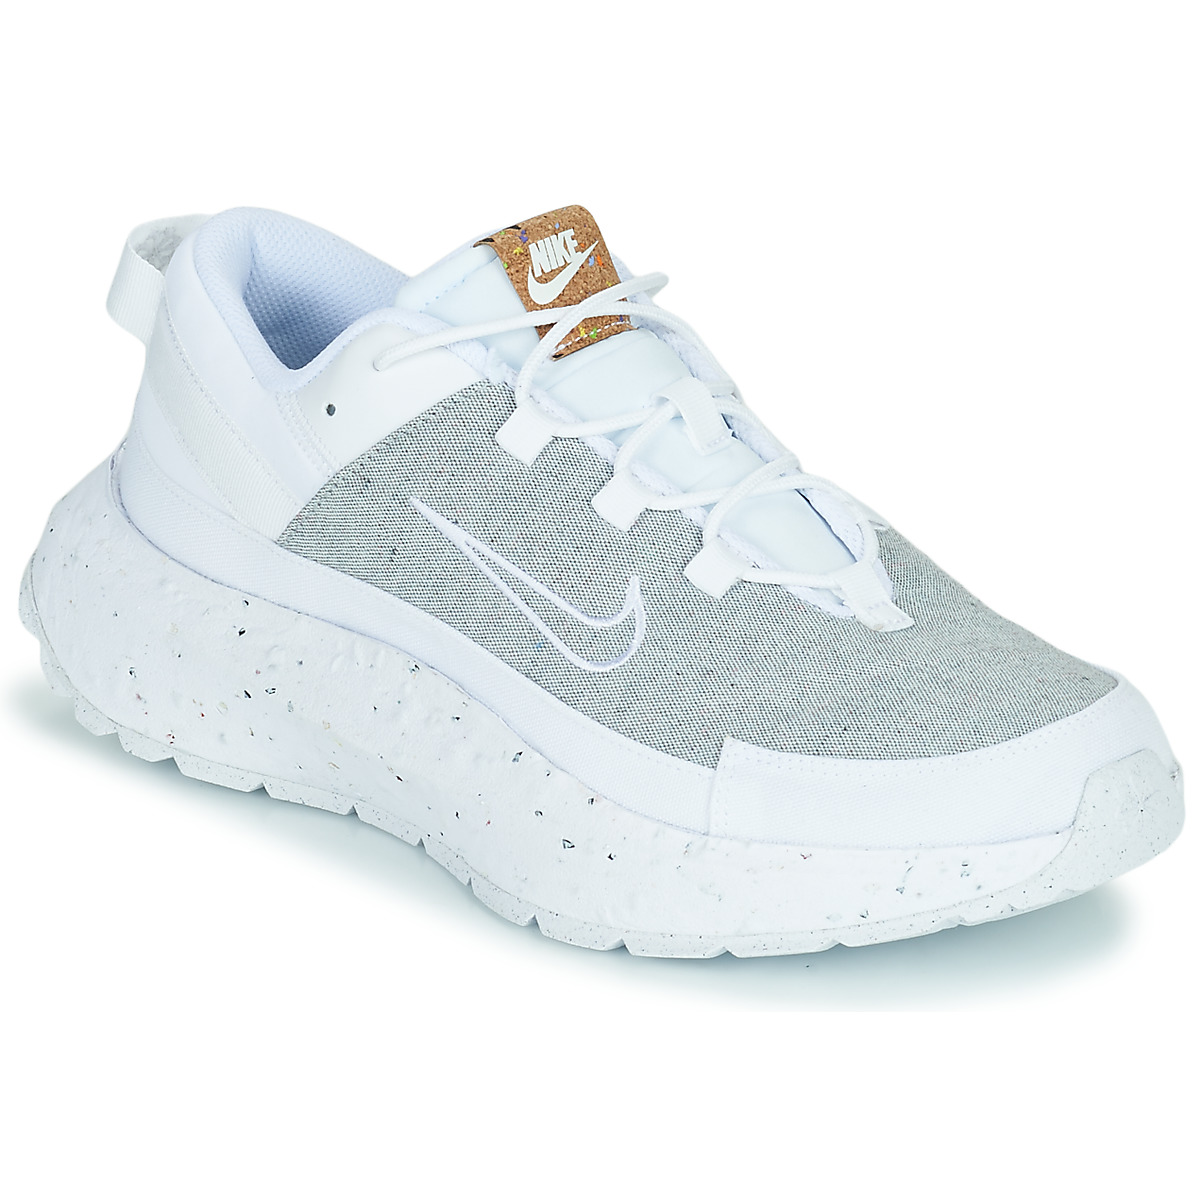 Nike crystal NIKE CRATER REMIXA 21544413 1200 A